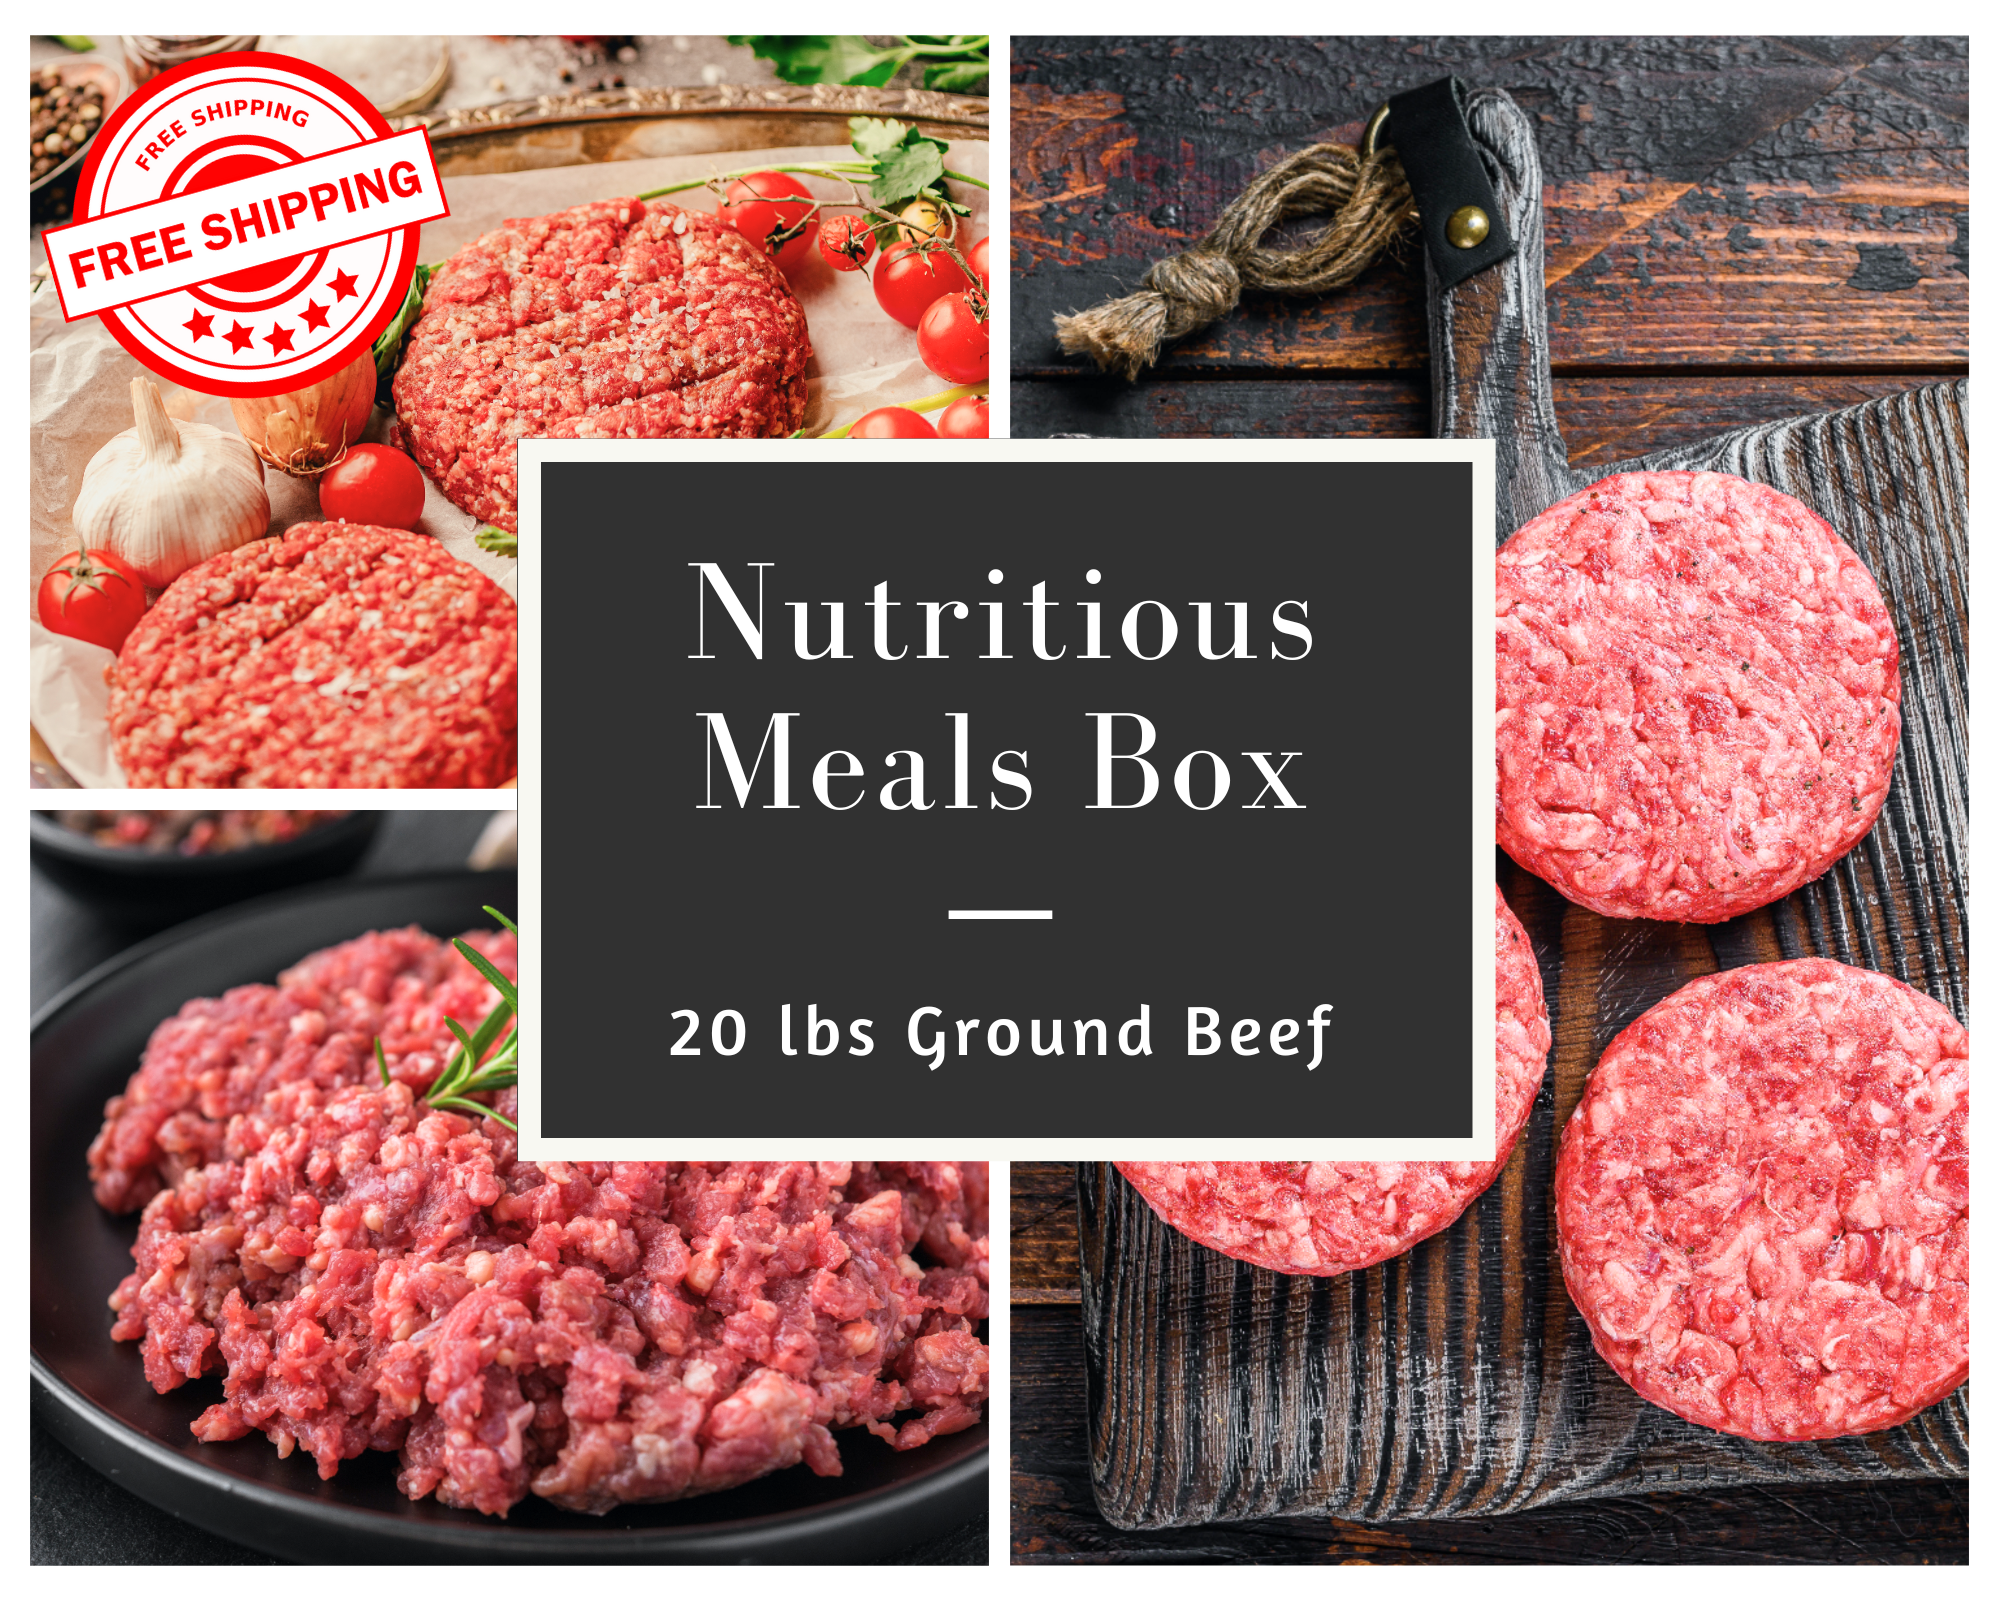 Nutritious Meals Box - 20lb Ground Beef